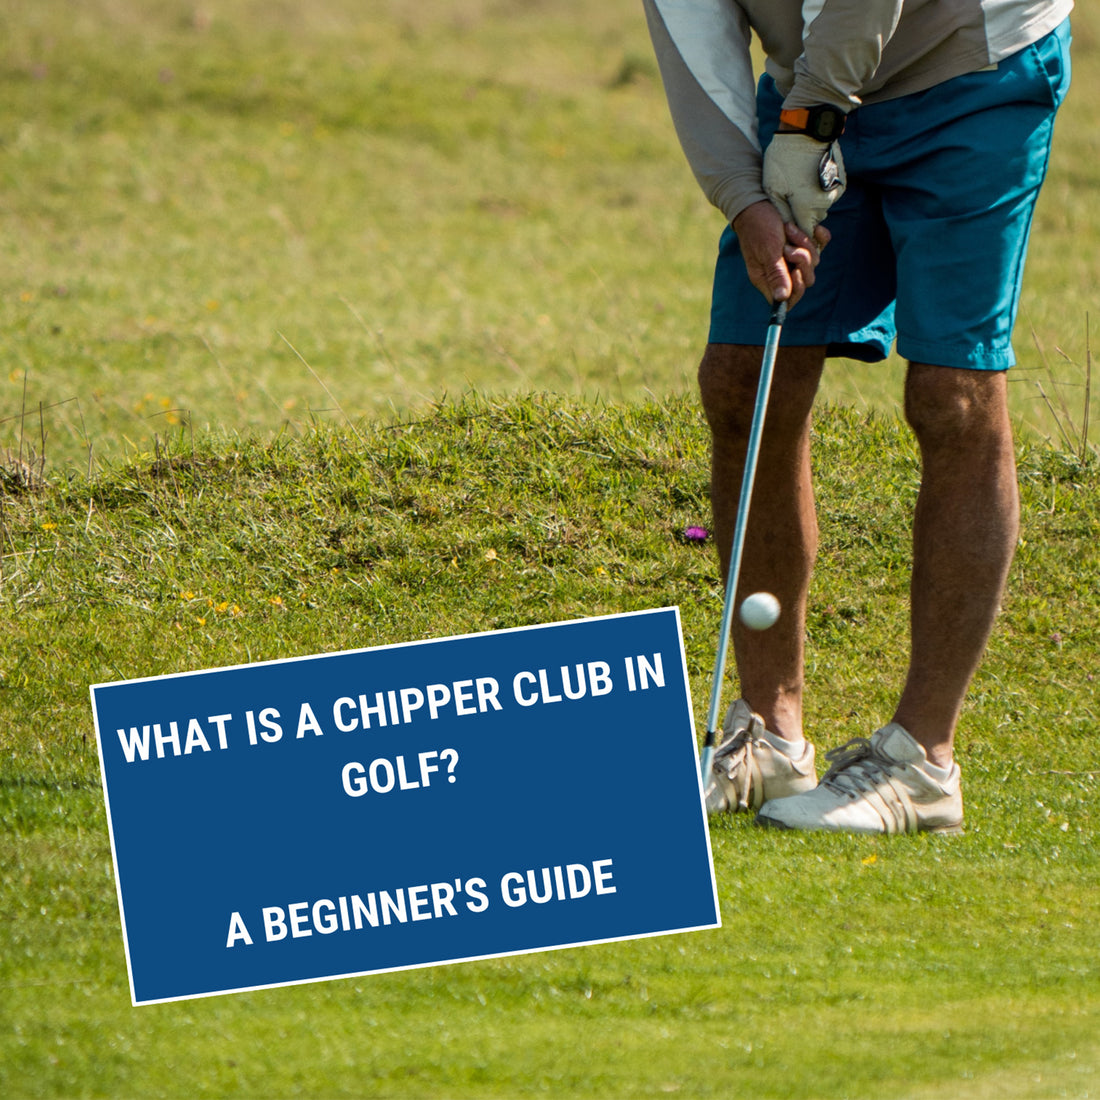 What Is A Chipper Club In Golf? A Beginner's Guide